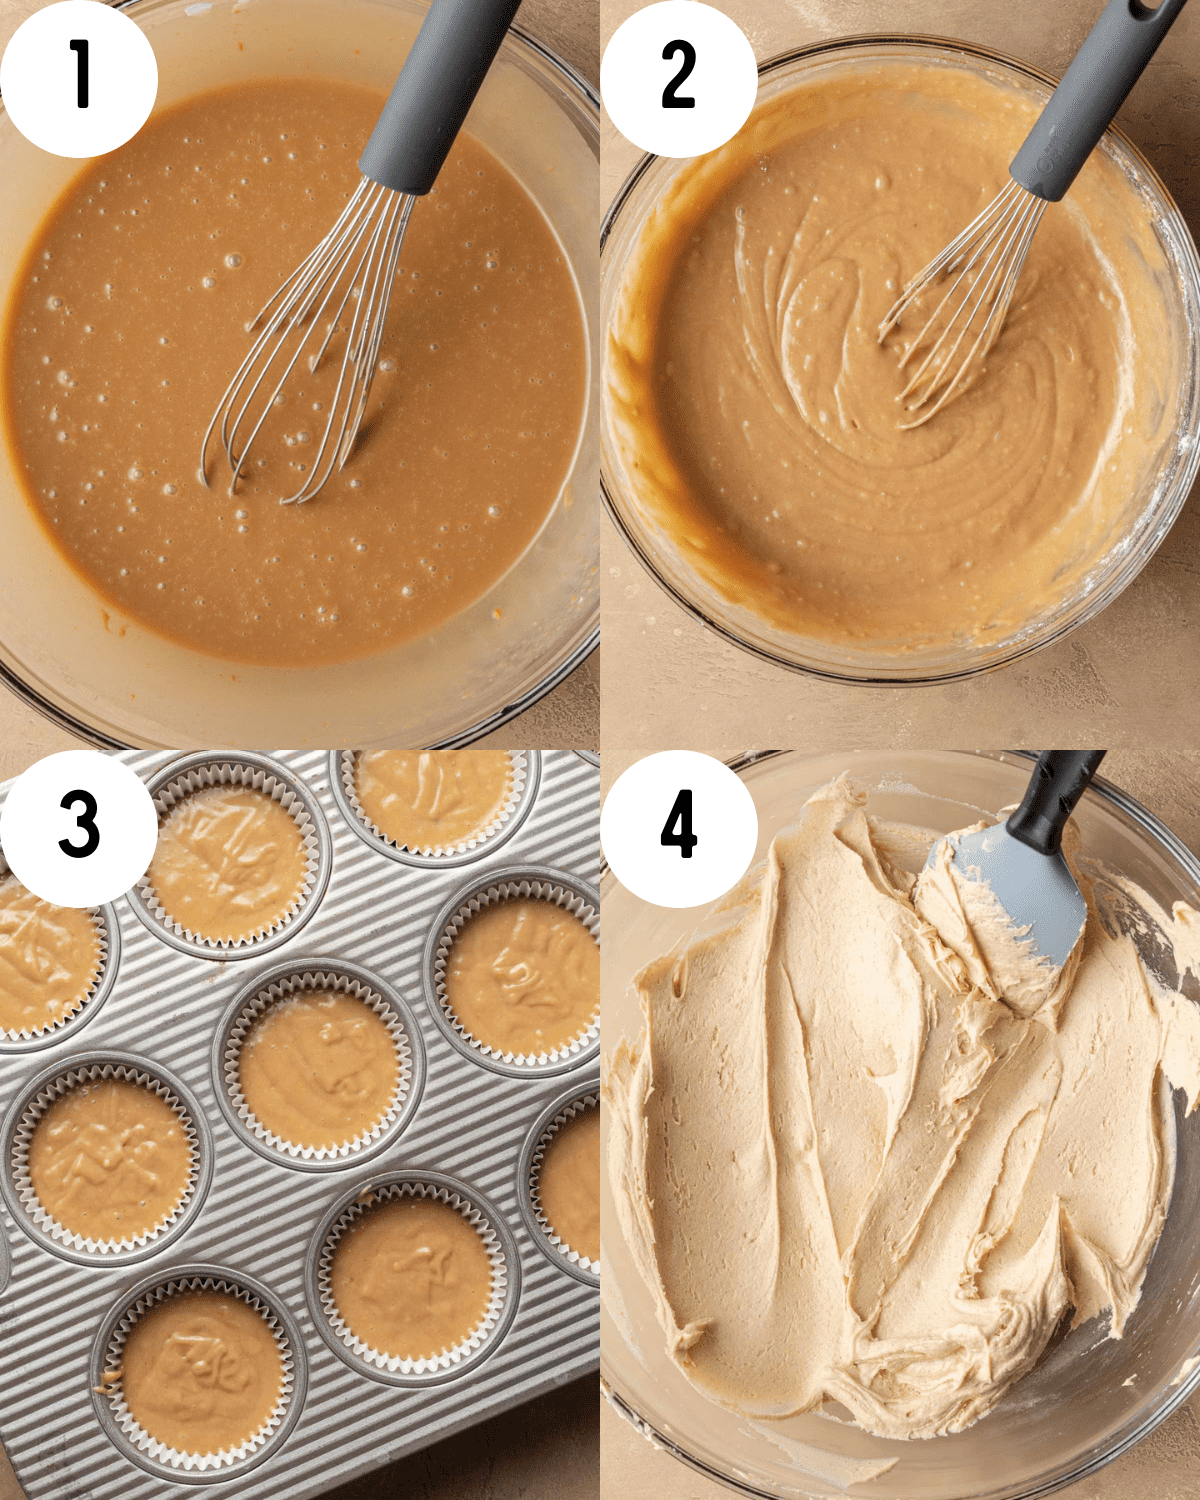 How to make Biscoff Cupcakes. 1. Wet ingredients in glass mixing bowl with whisk. 2. Mix wet and dry ingredients with a whisk in the glass mixing bowl. 3. Pour batter into the cup cake pan. 4. Prepare buttercream icing in glass mixing bowl with spatula. 